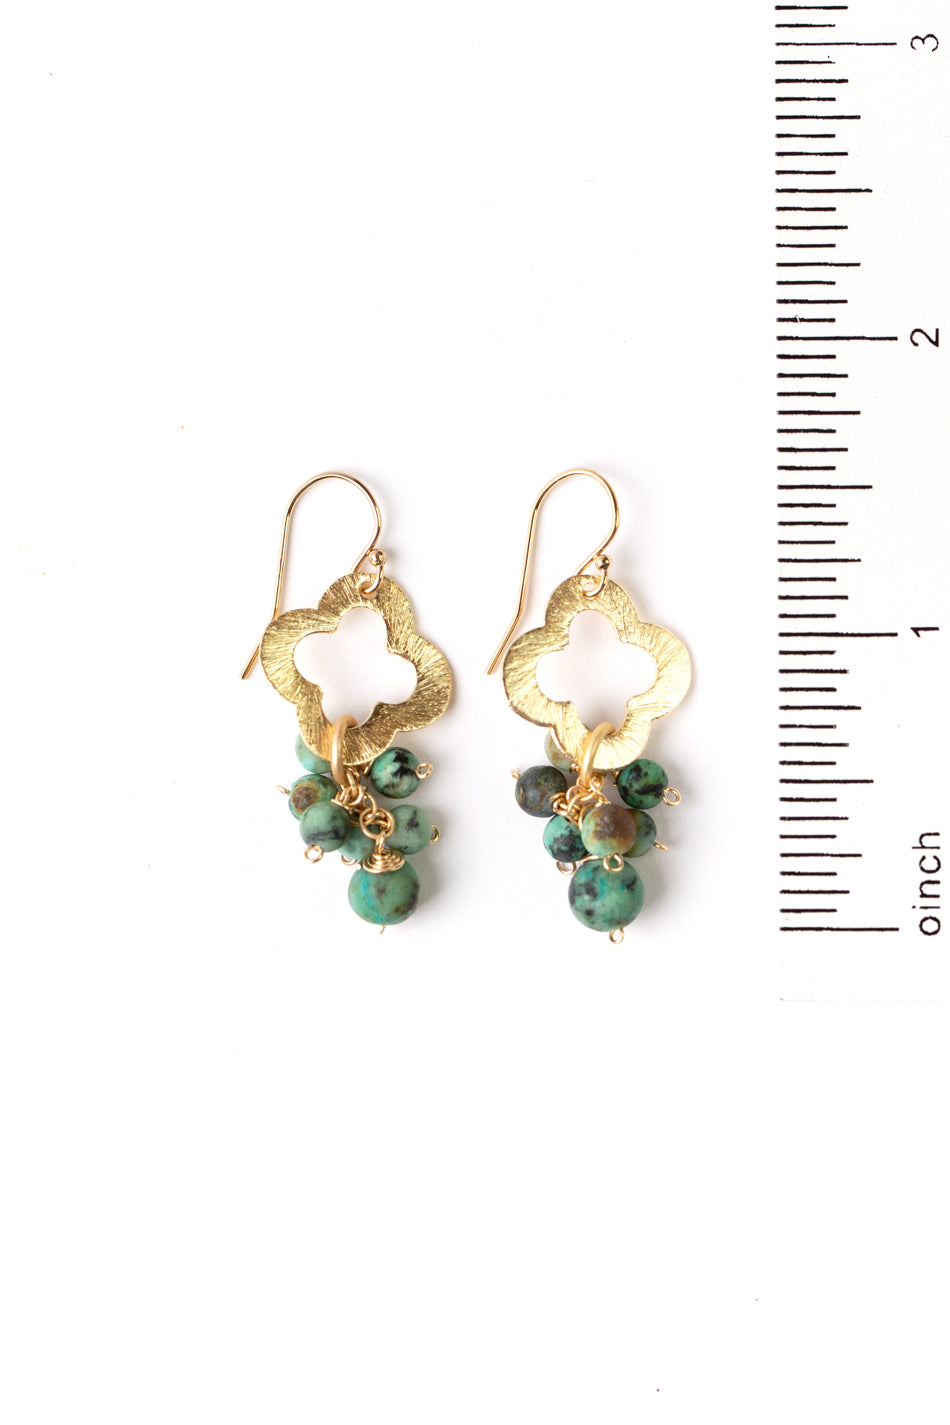 Tranquil Gardens African Turquoise Cluster Dangle Earrings